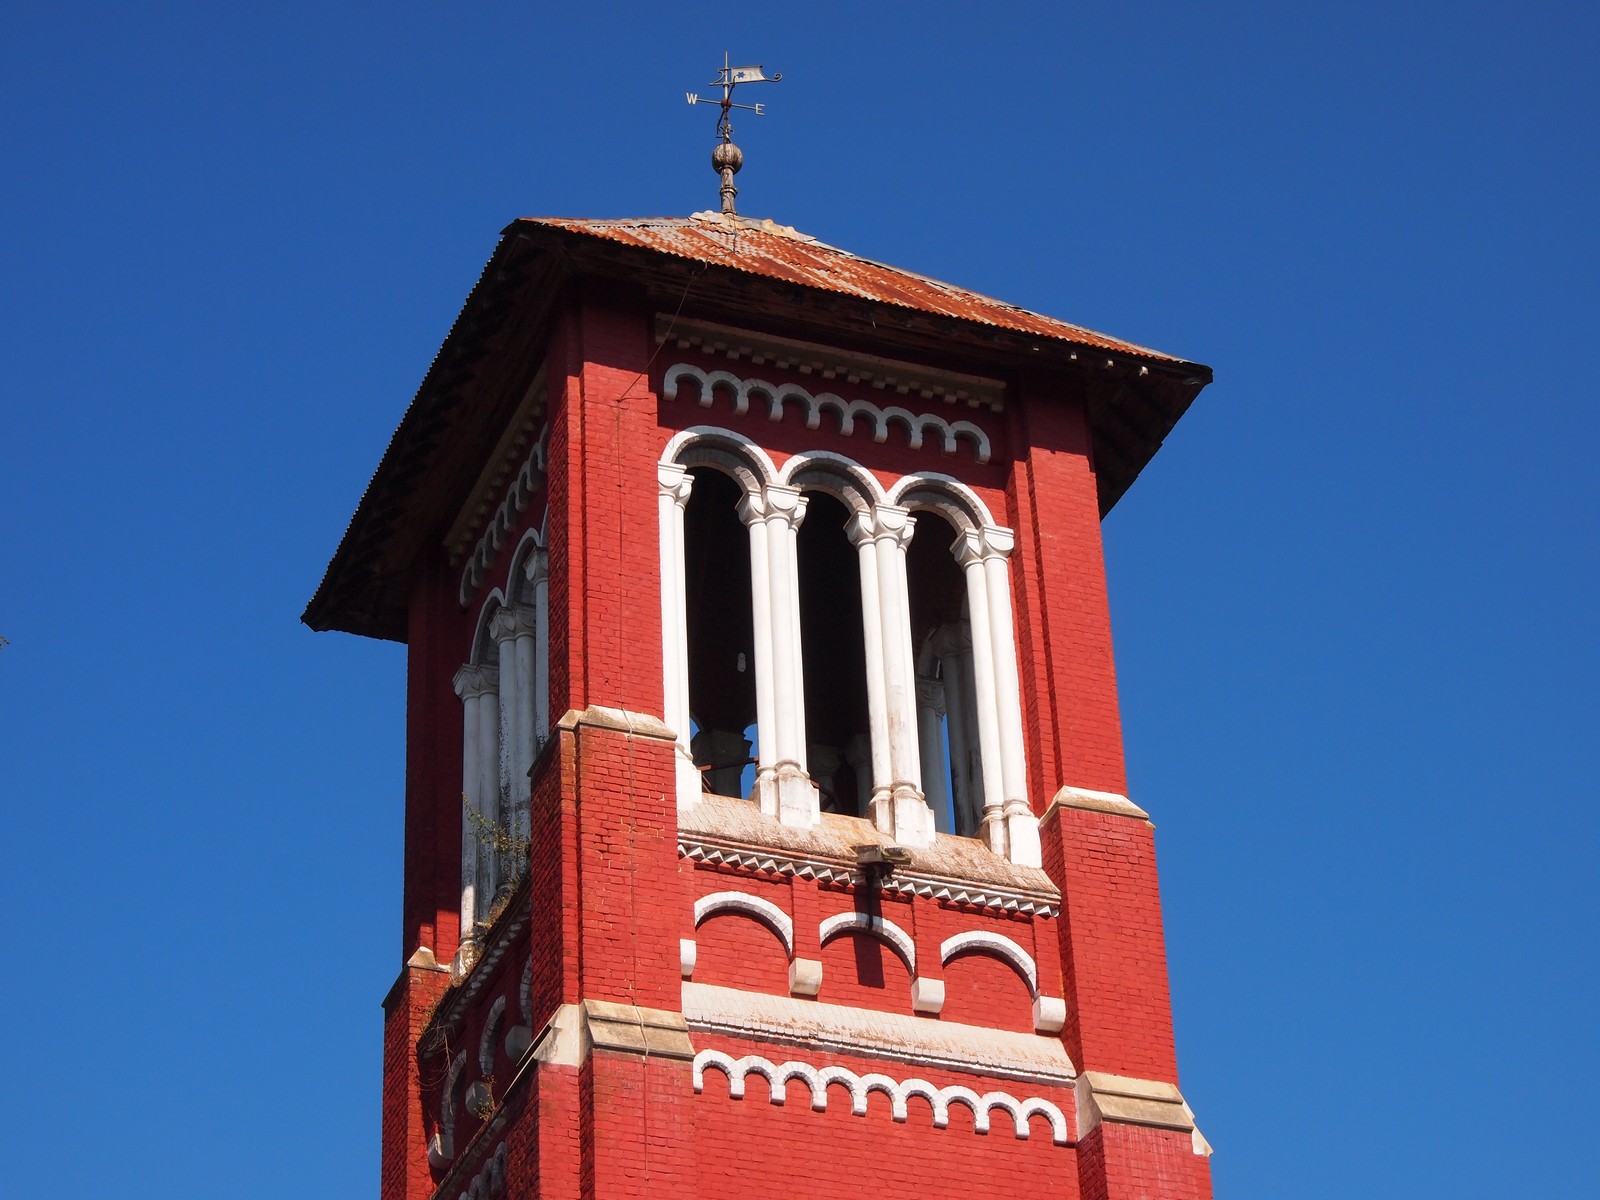 an old fashioned red clock tower is seen against a clear blue sky